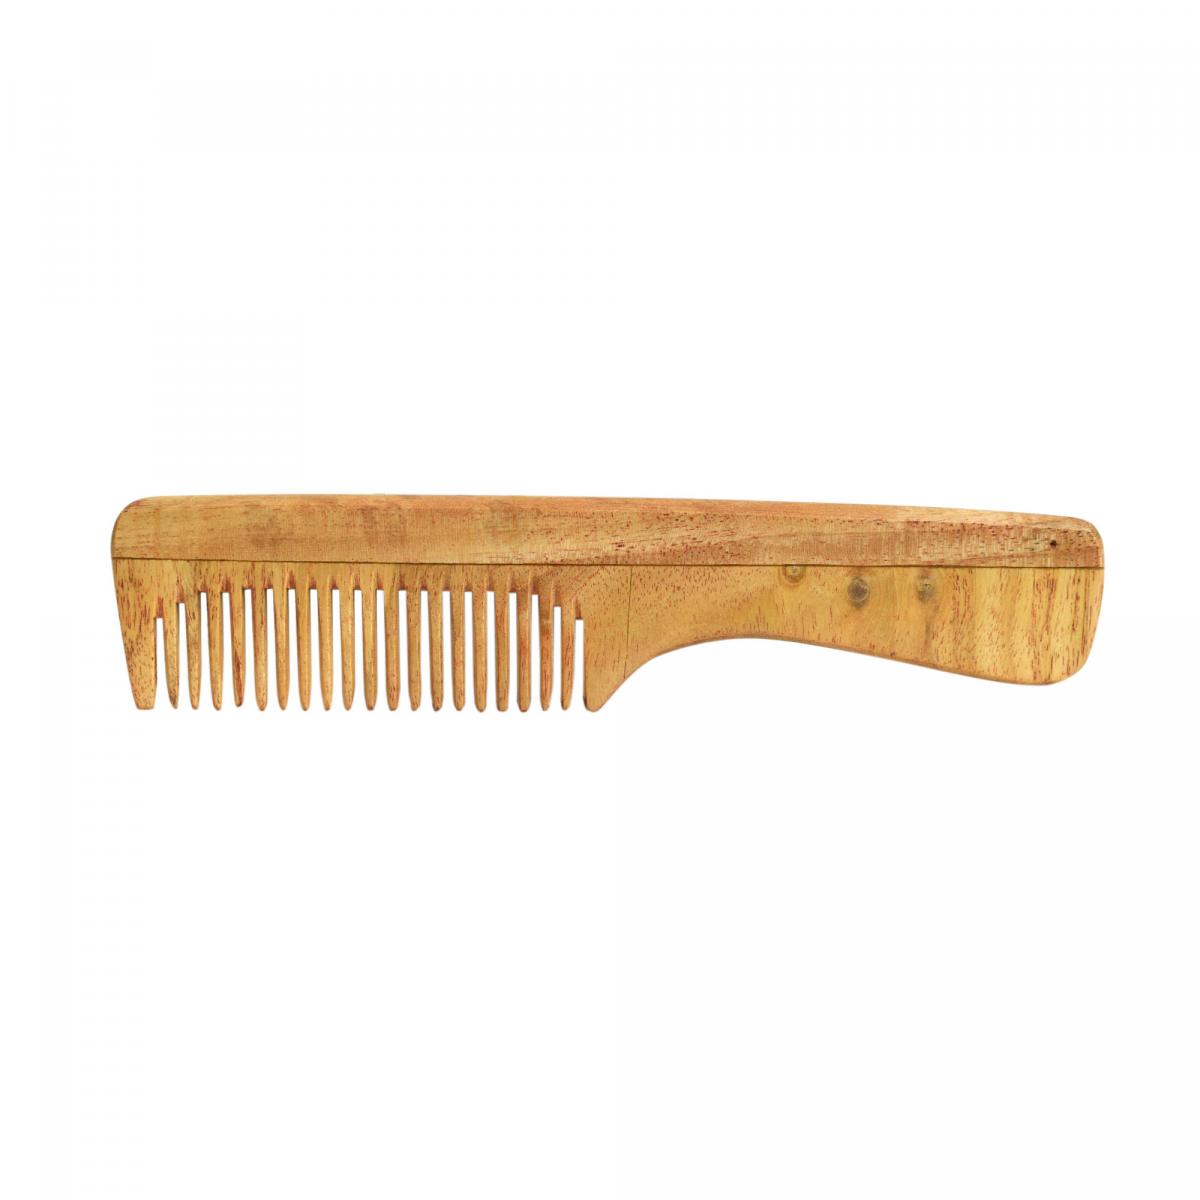 HANDCRAFTED WOODEN COMB